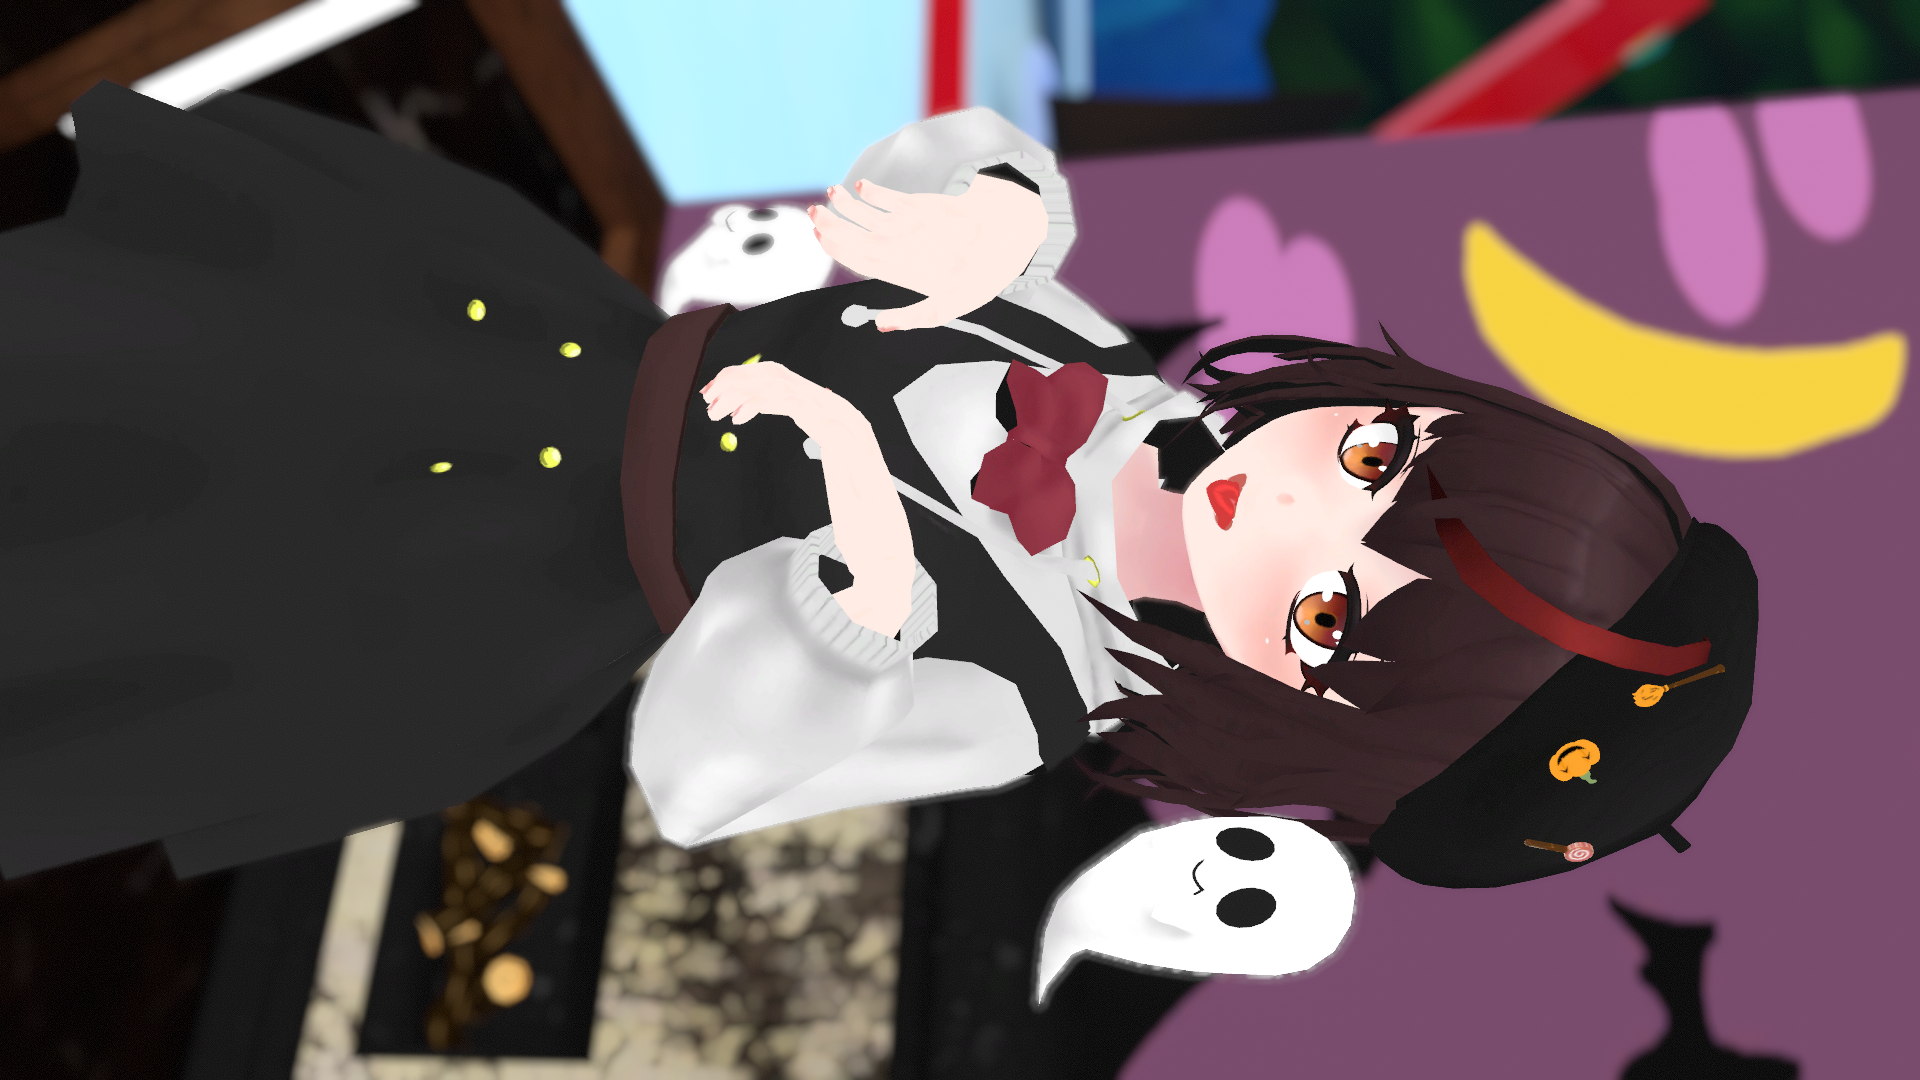 VRChat_1920x1080_2021-12-05_04-43-07.906.png